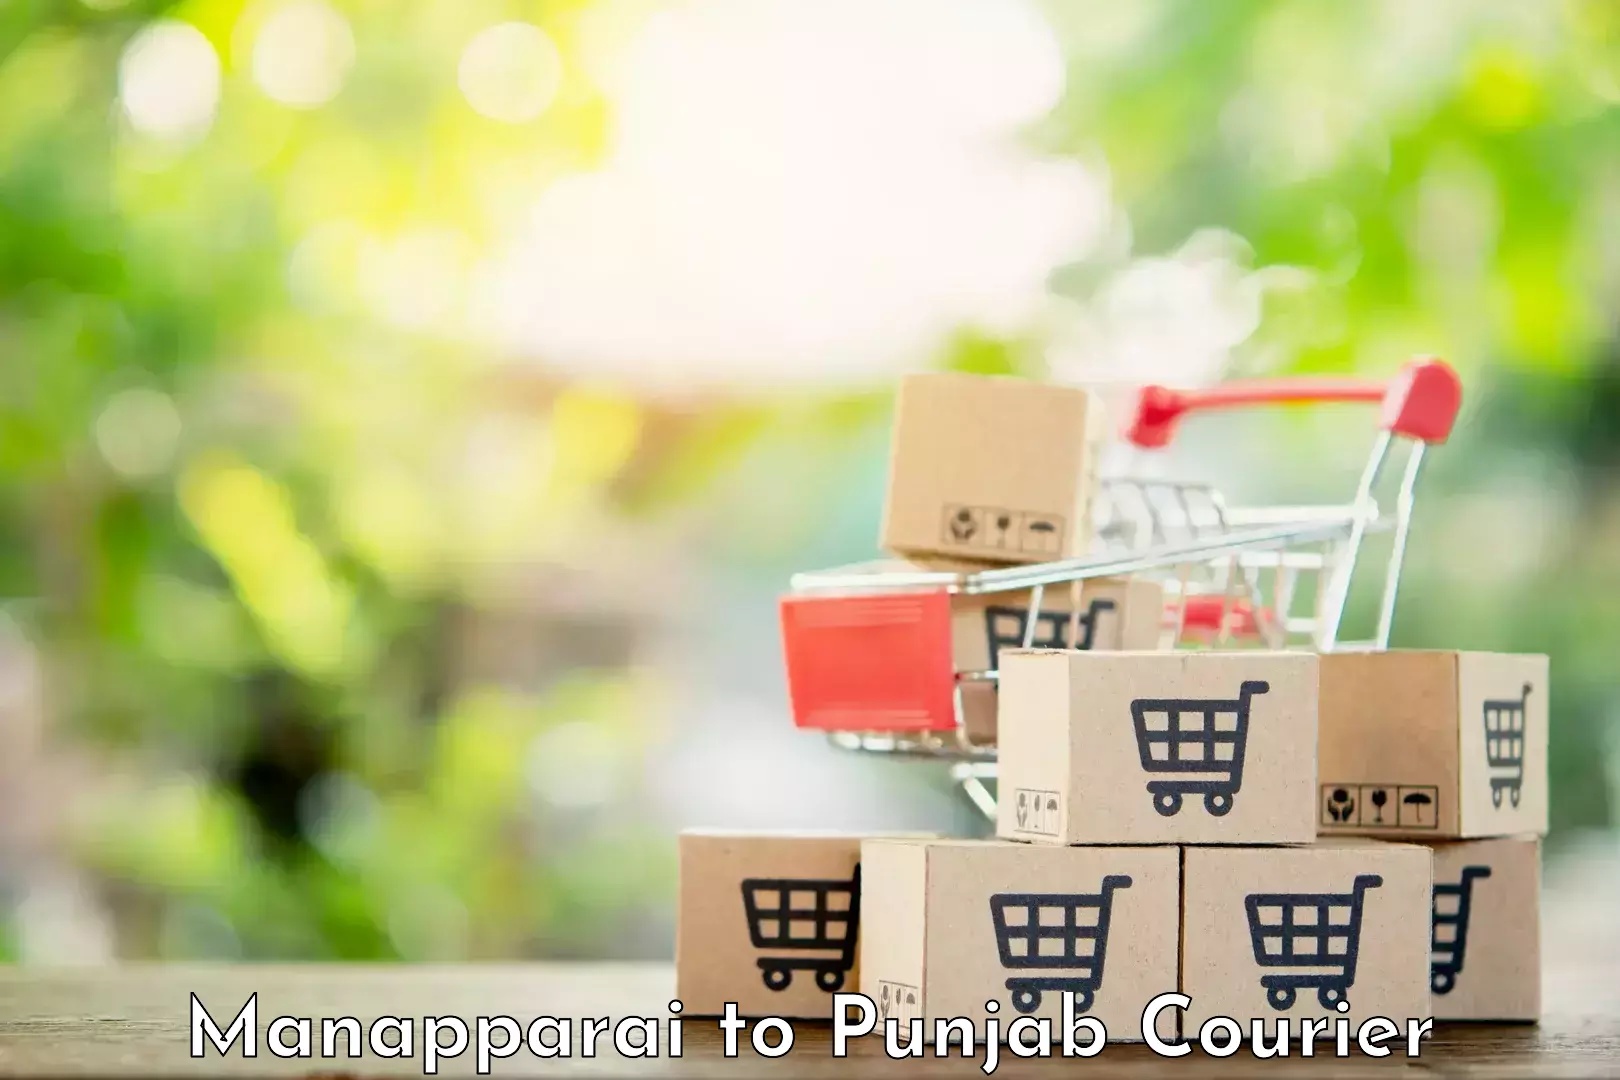 Professional courier handling in Manapparai to Punjab